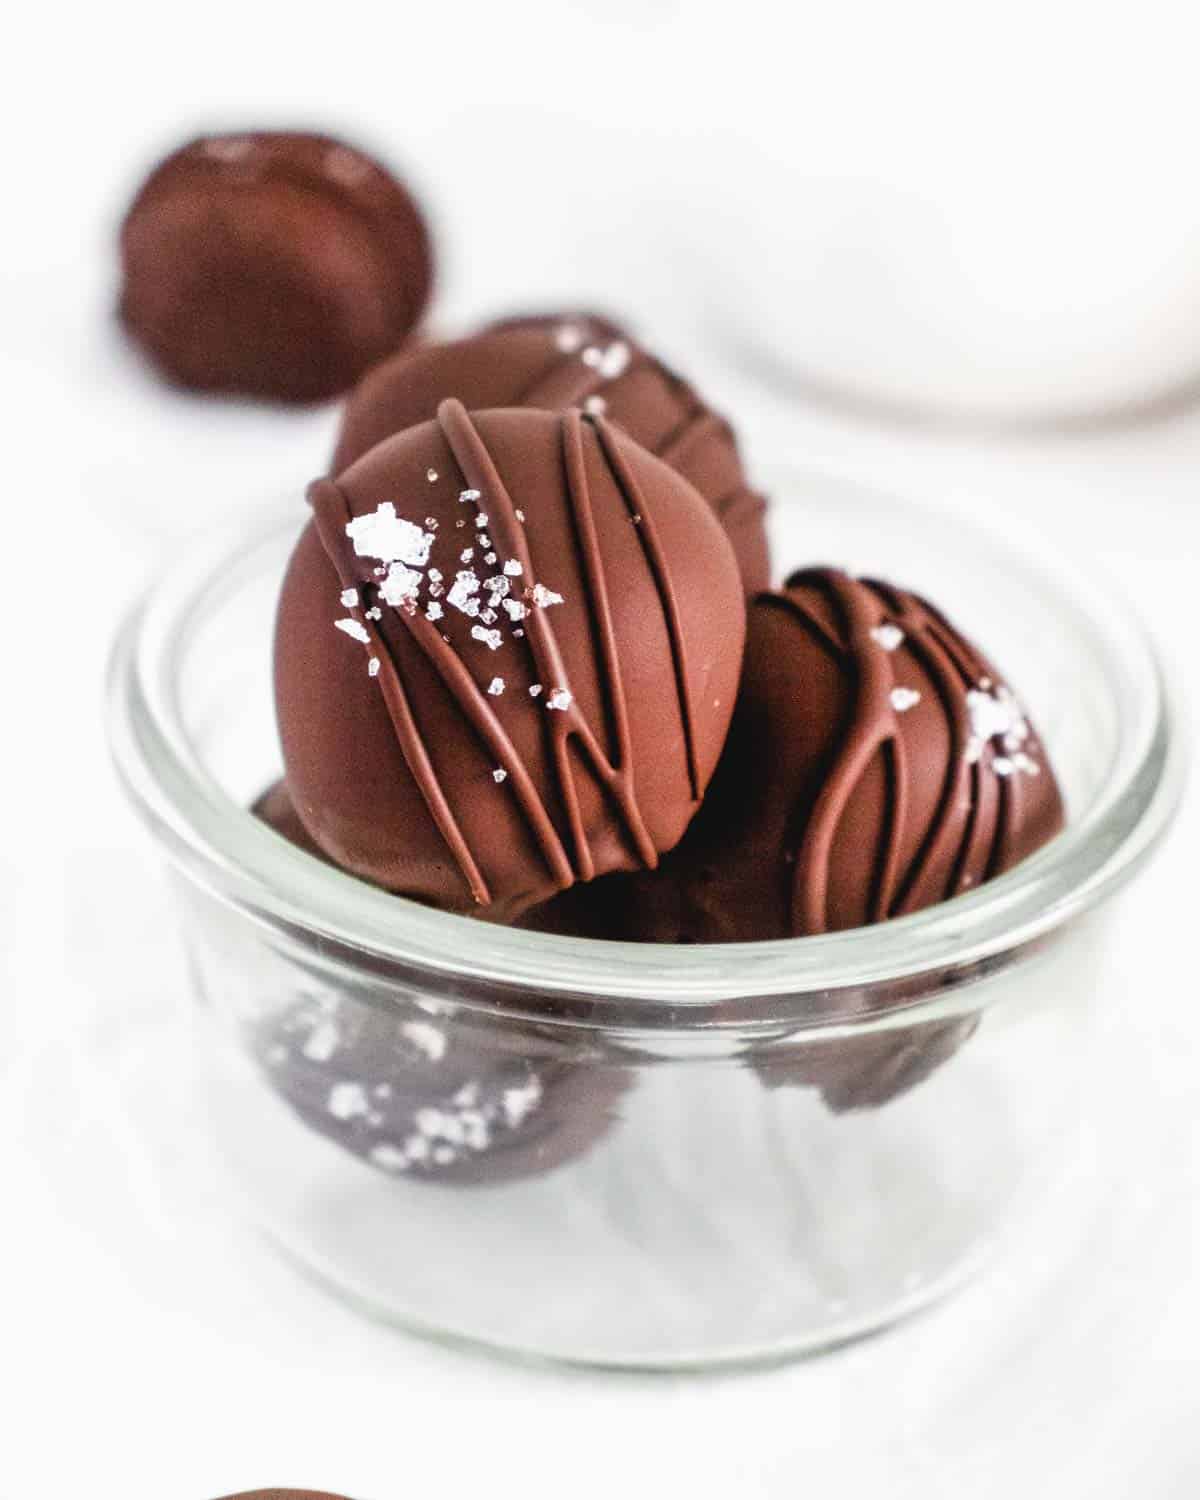 Close up photo of homemade Chocolate Truffles topped with sea salt and a drizzle of chocolate